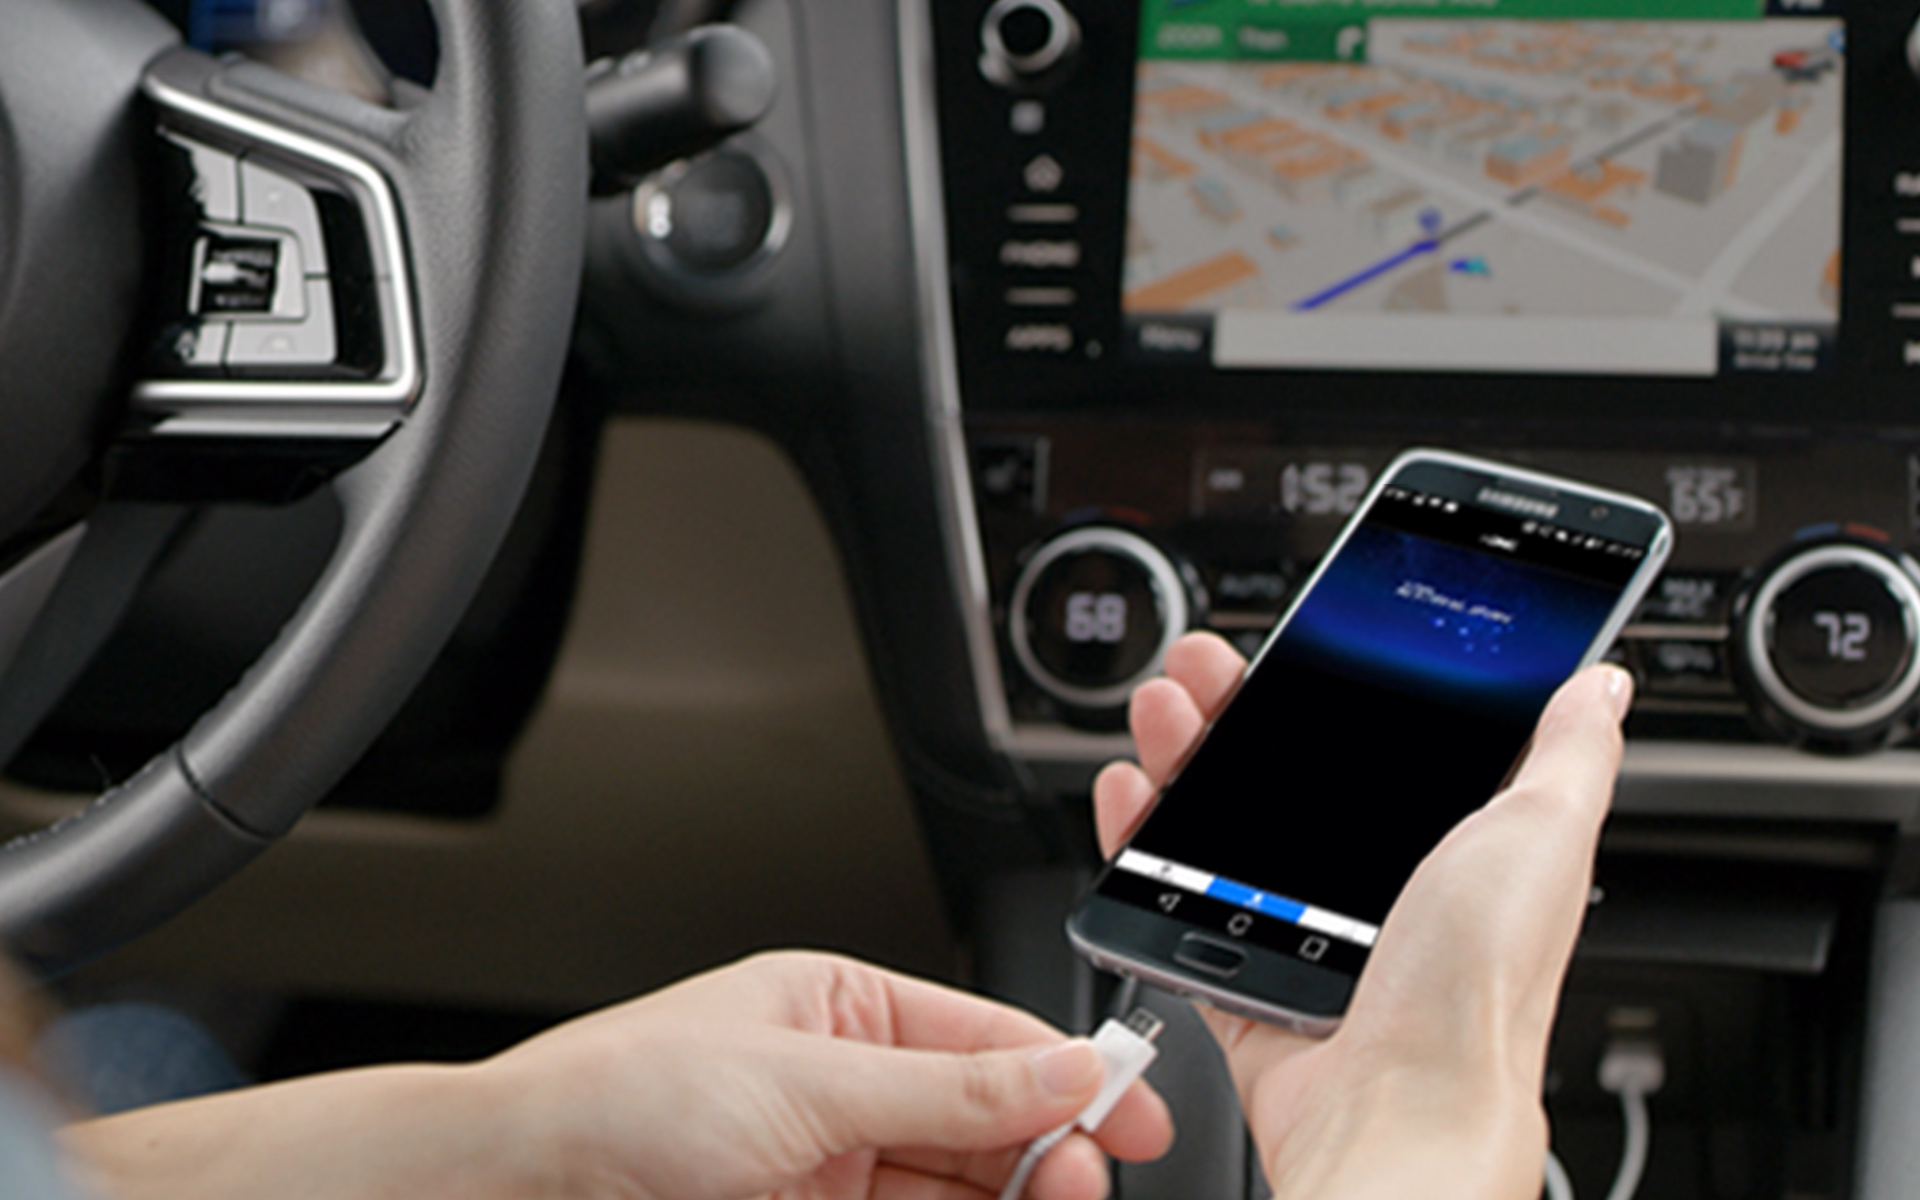 A smartphone with the SUBARU STARLINK app in use while being plugged into a Subaru’s in-vehicle multimedia touchscreen.